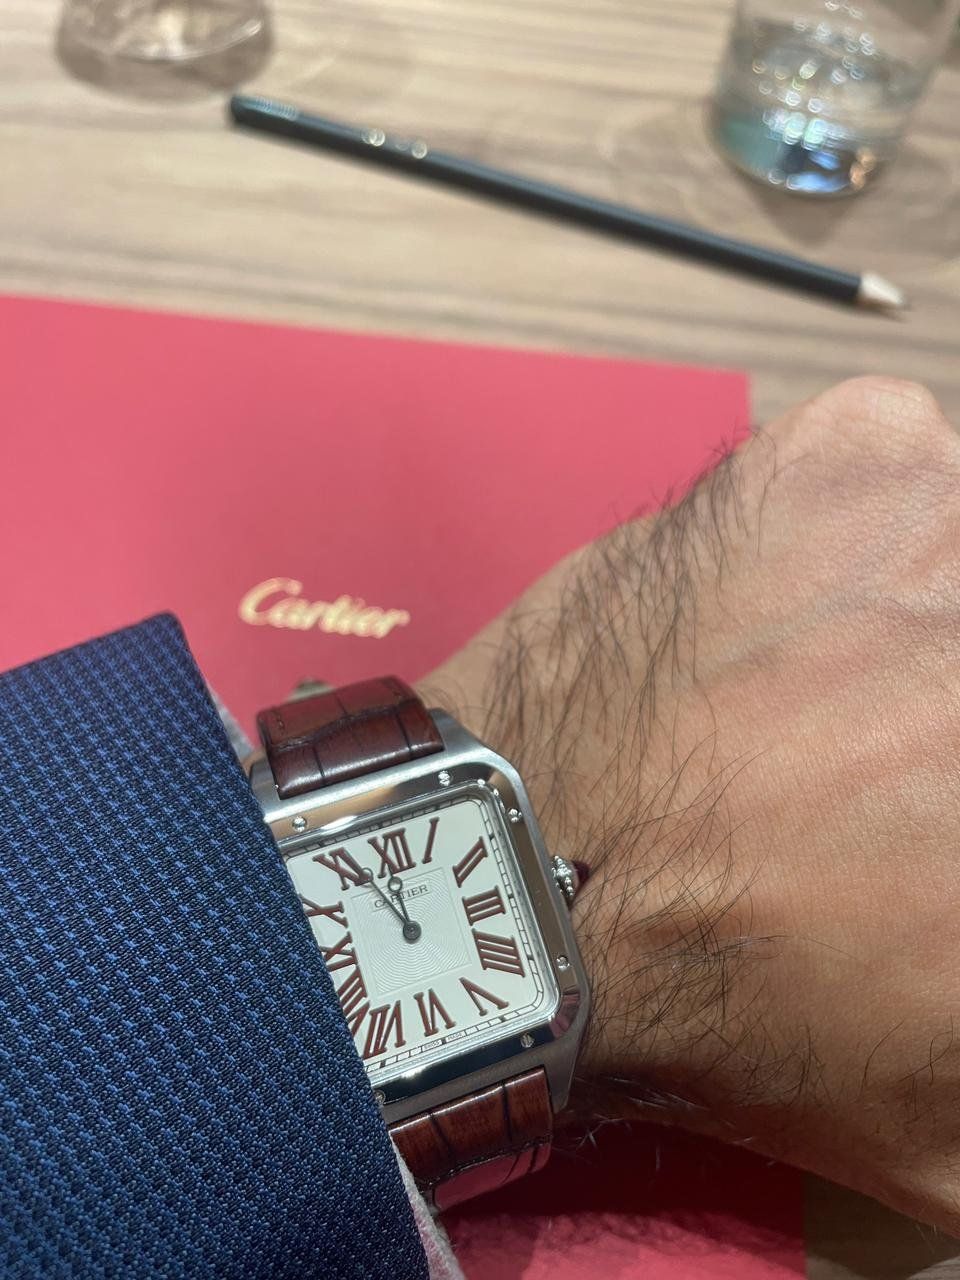 Cartier Launches At Watches & Wonders 2023